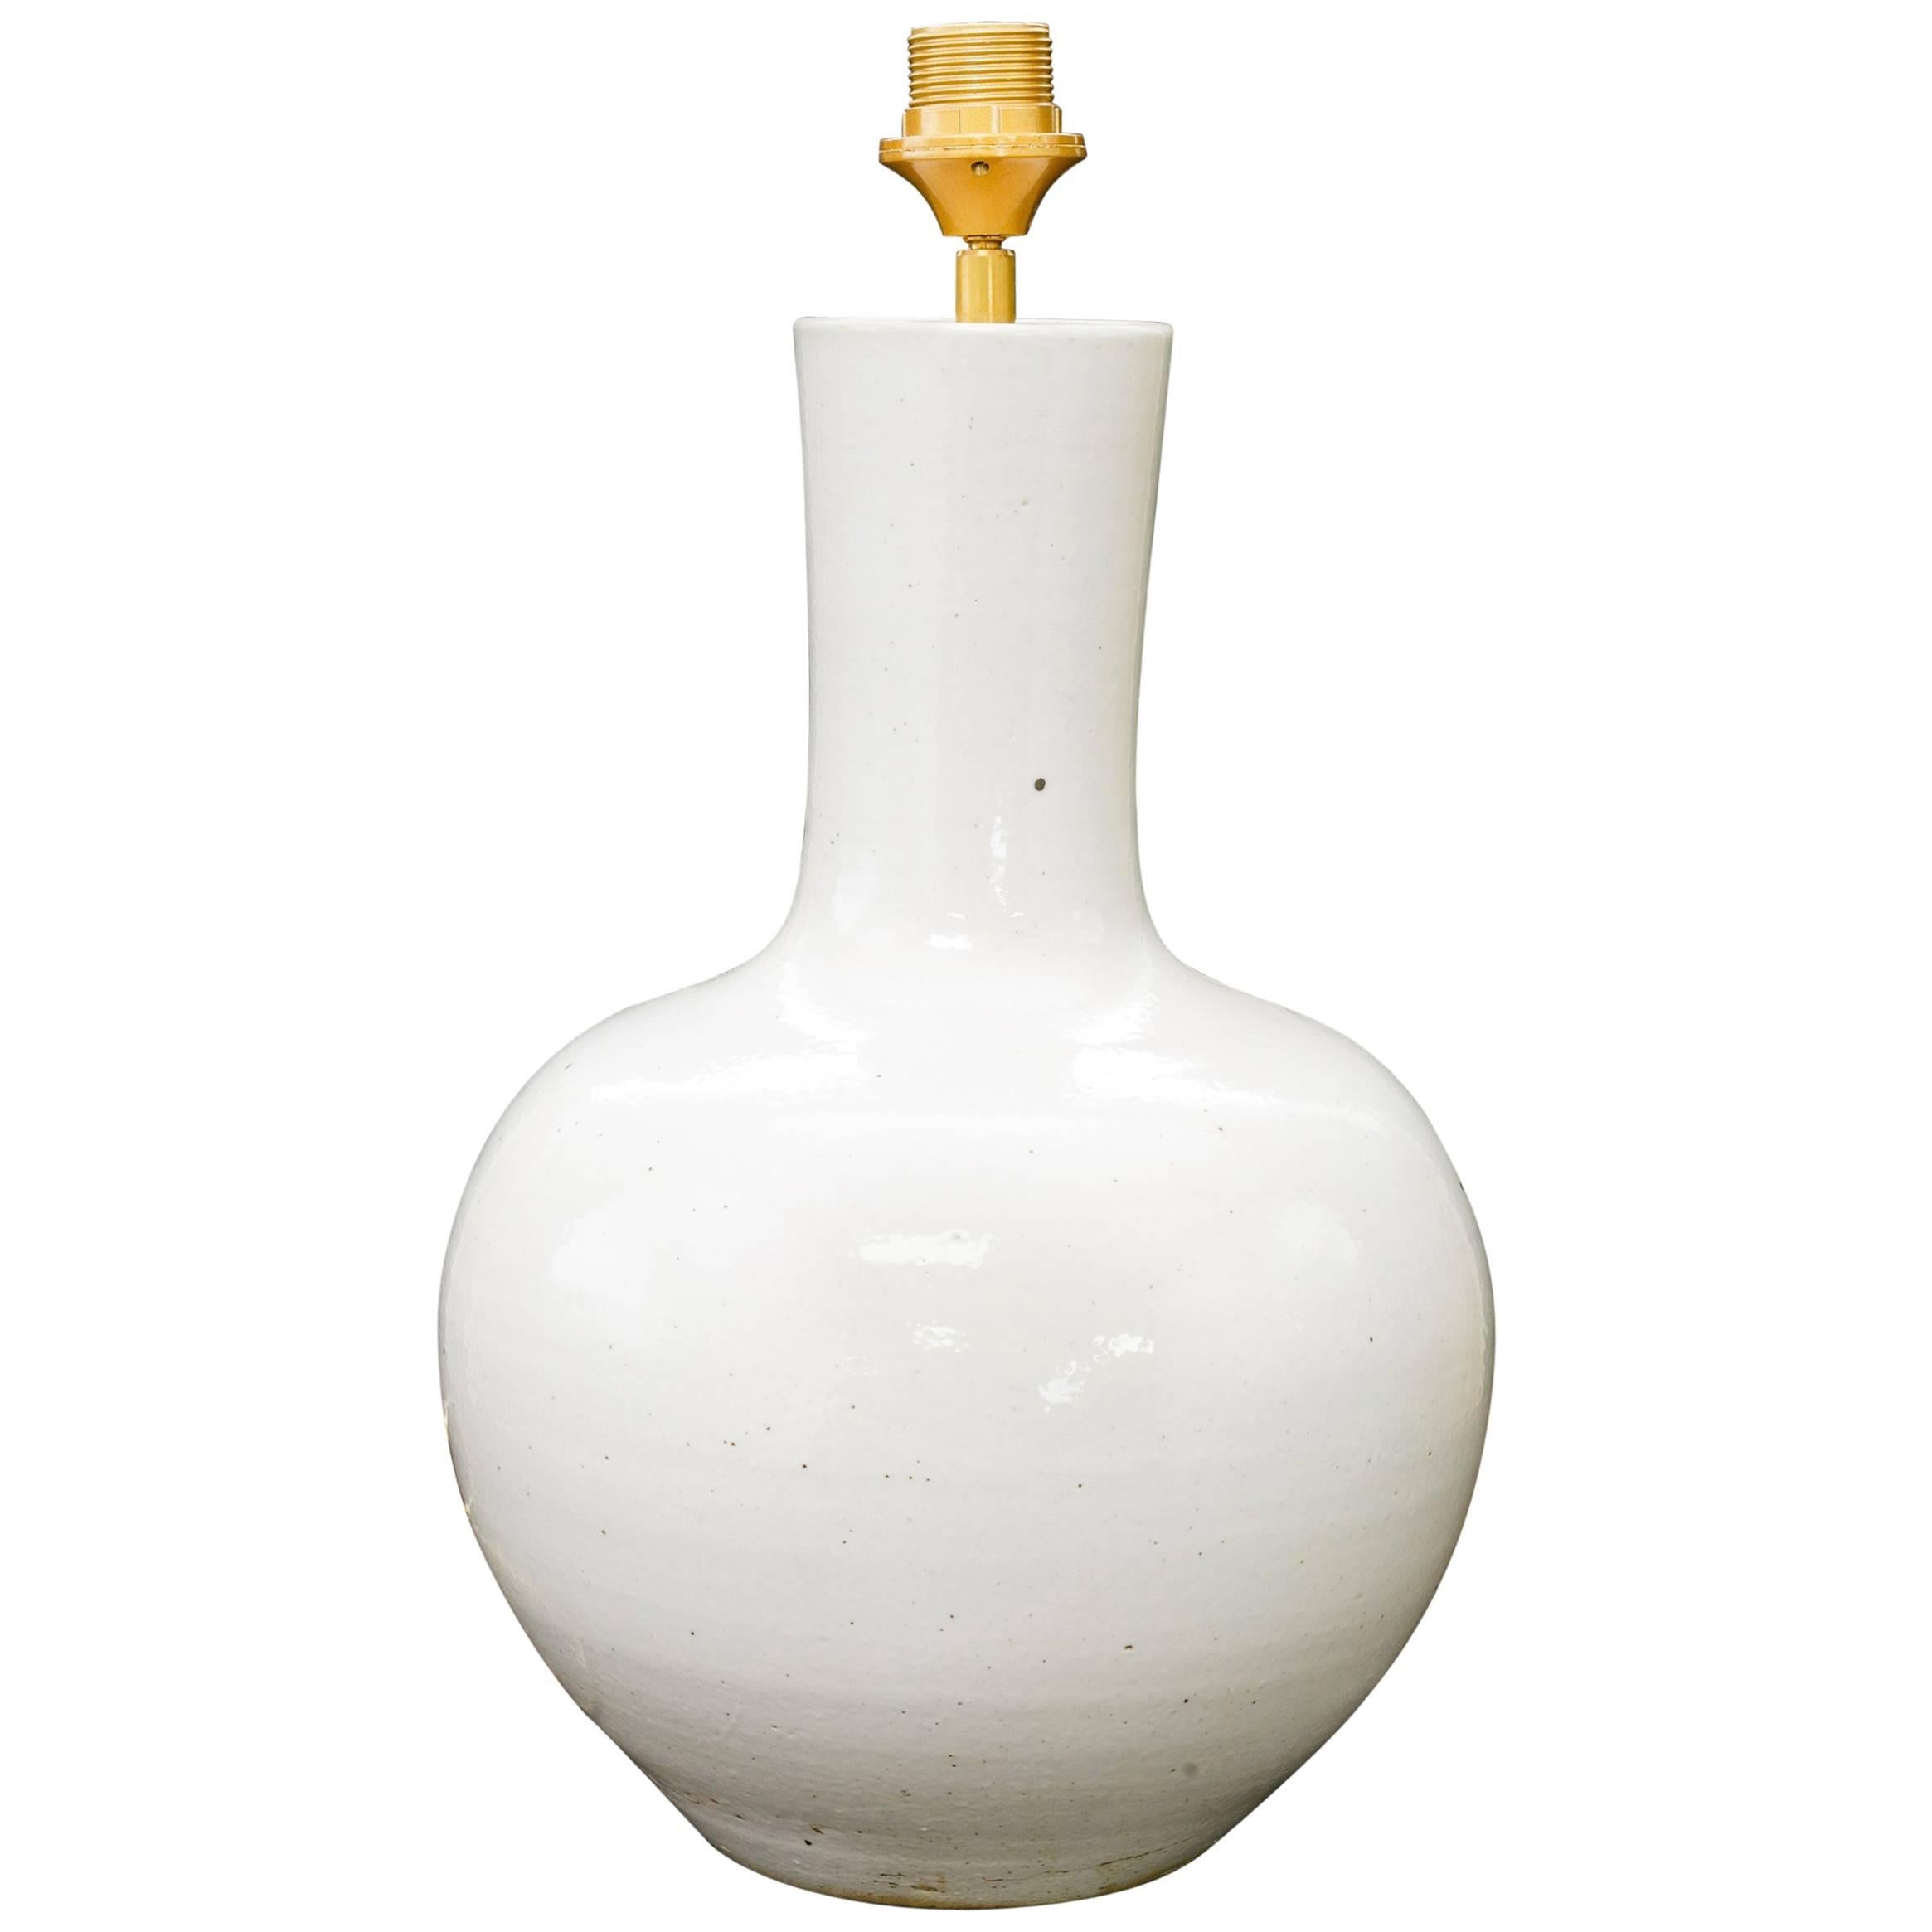 Four Gourd-Shaped Table Lamps